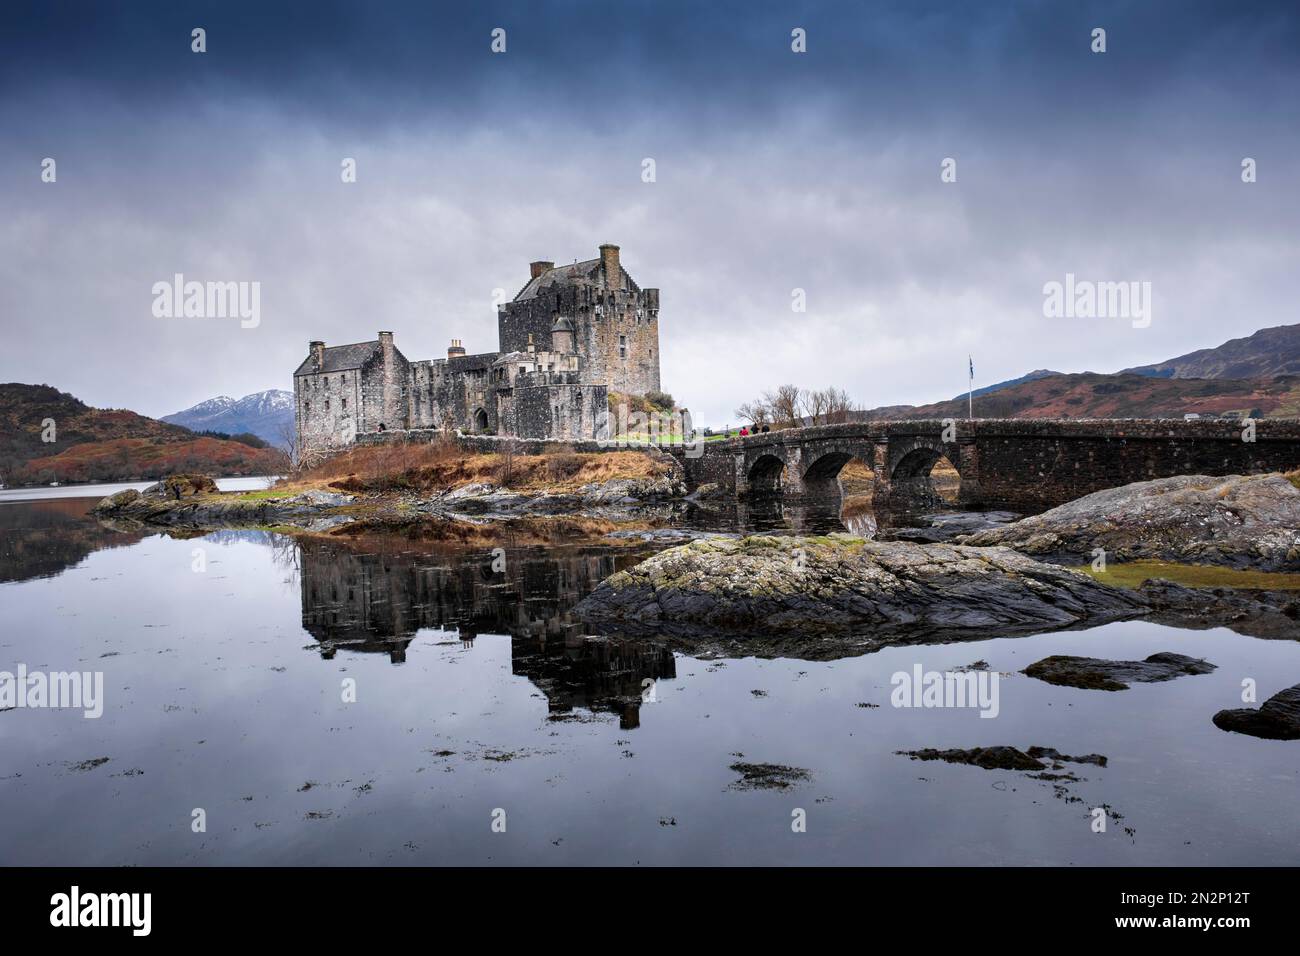 Scotland, Highlands, the medieval Eilean Donan castle, Kyle of Lochalsh, winter view with Loch Alsh lake and snowy mountains Stock Photo